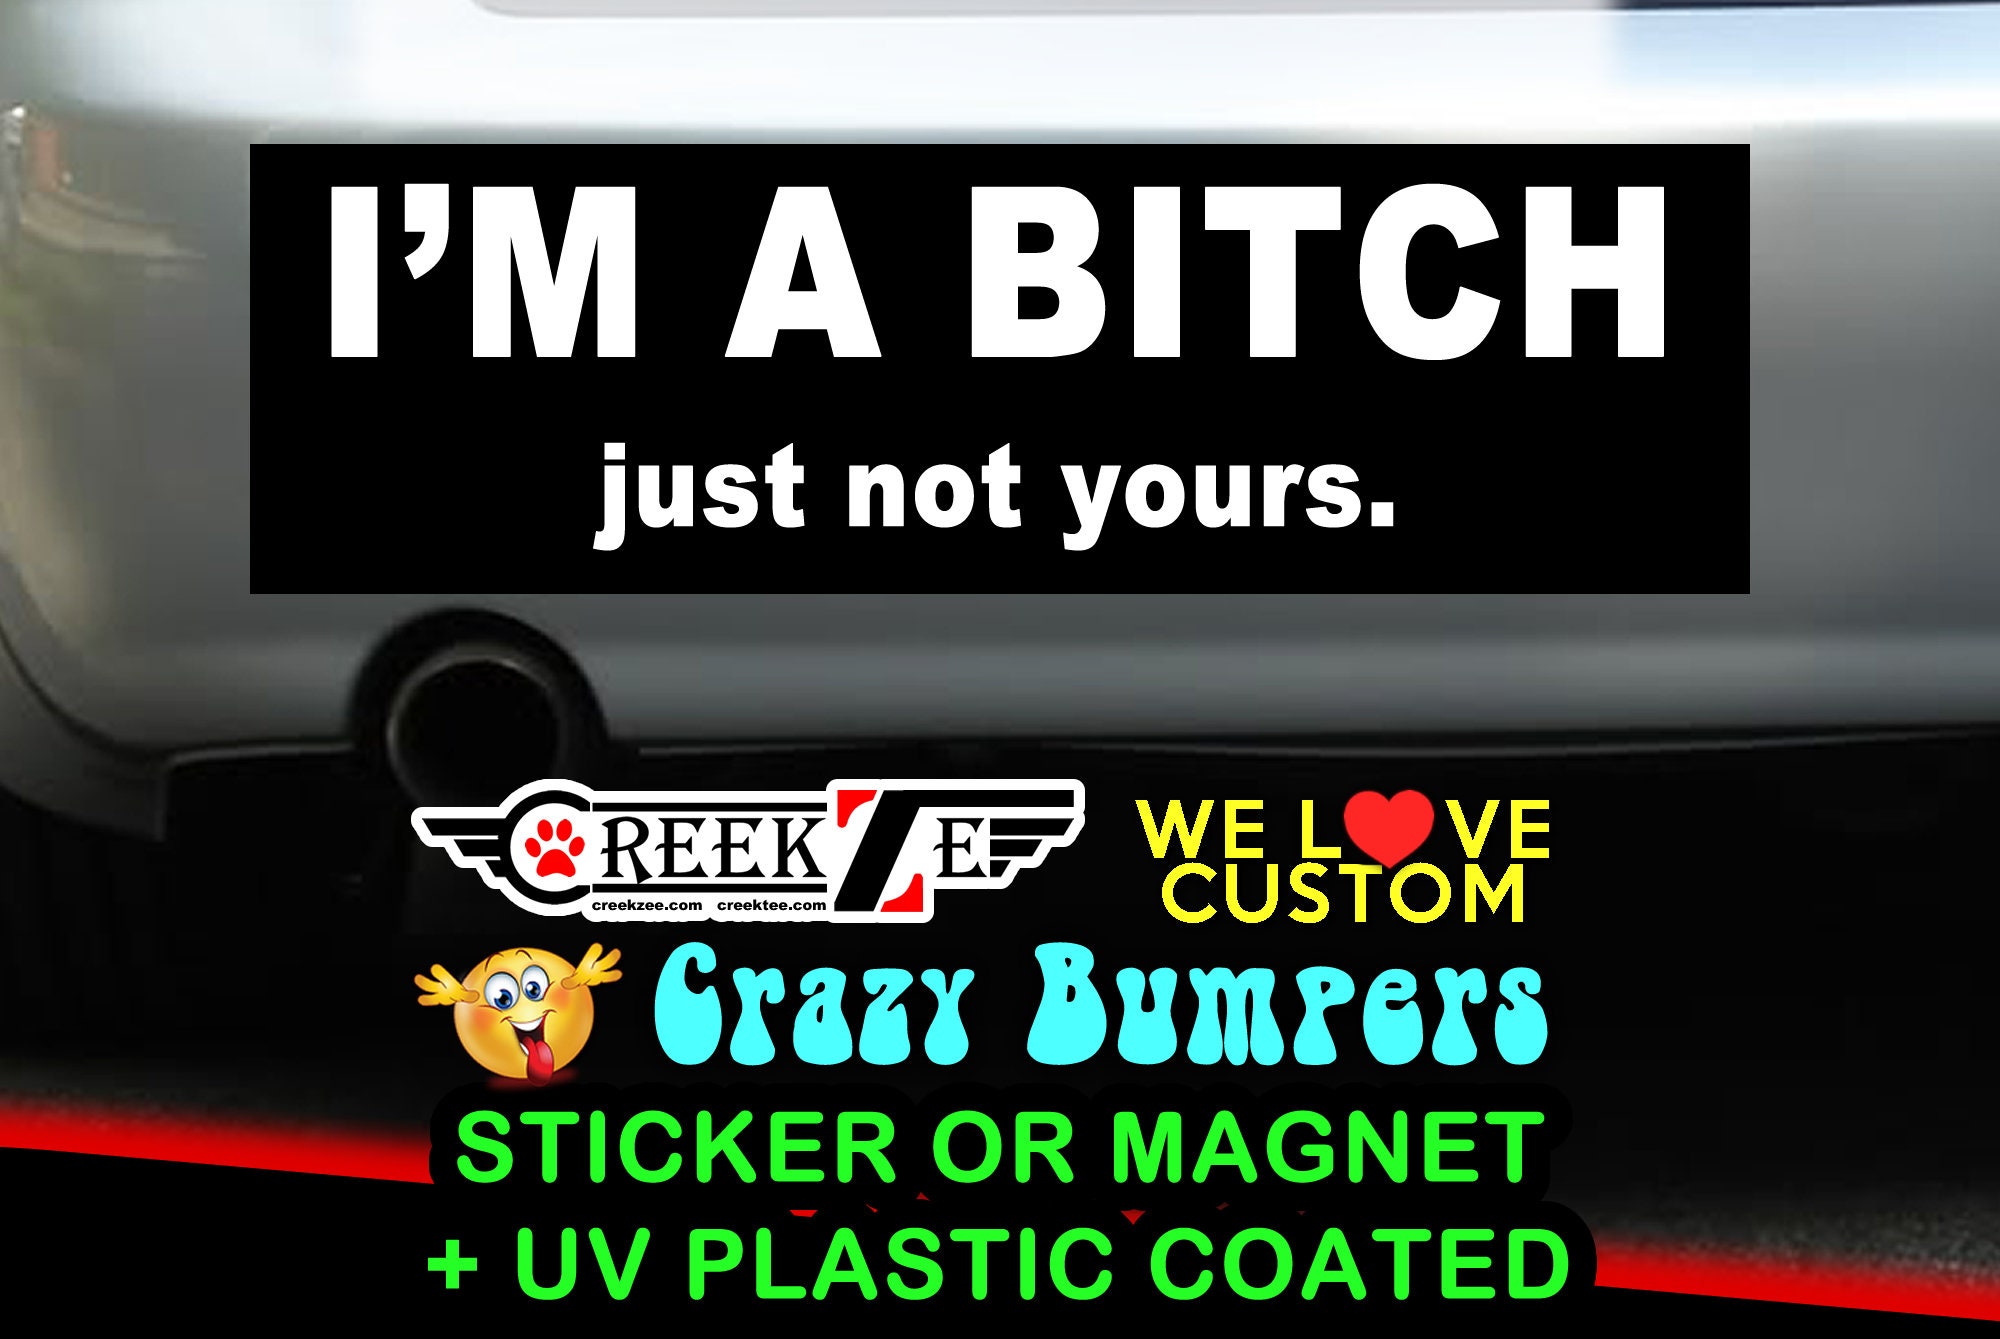 I'm A Bitch Just Not Yours Bumper Sticker or Magnet, various sizes available!